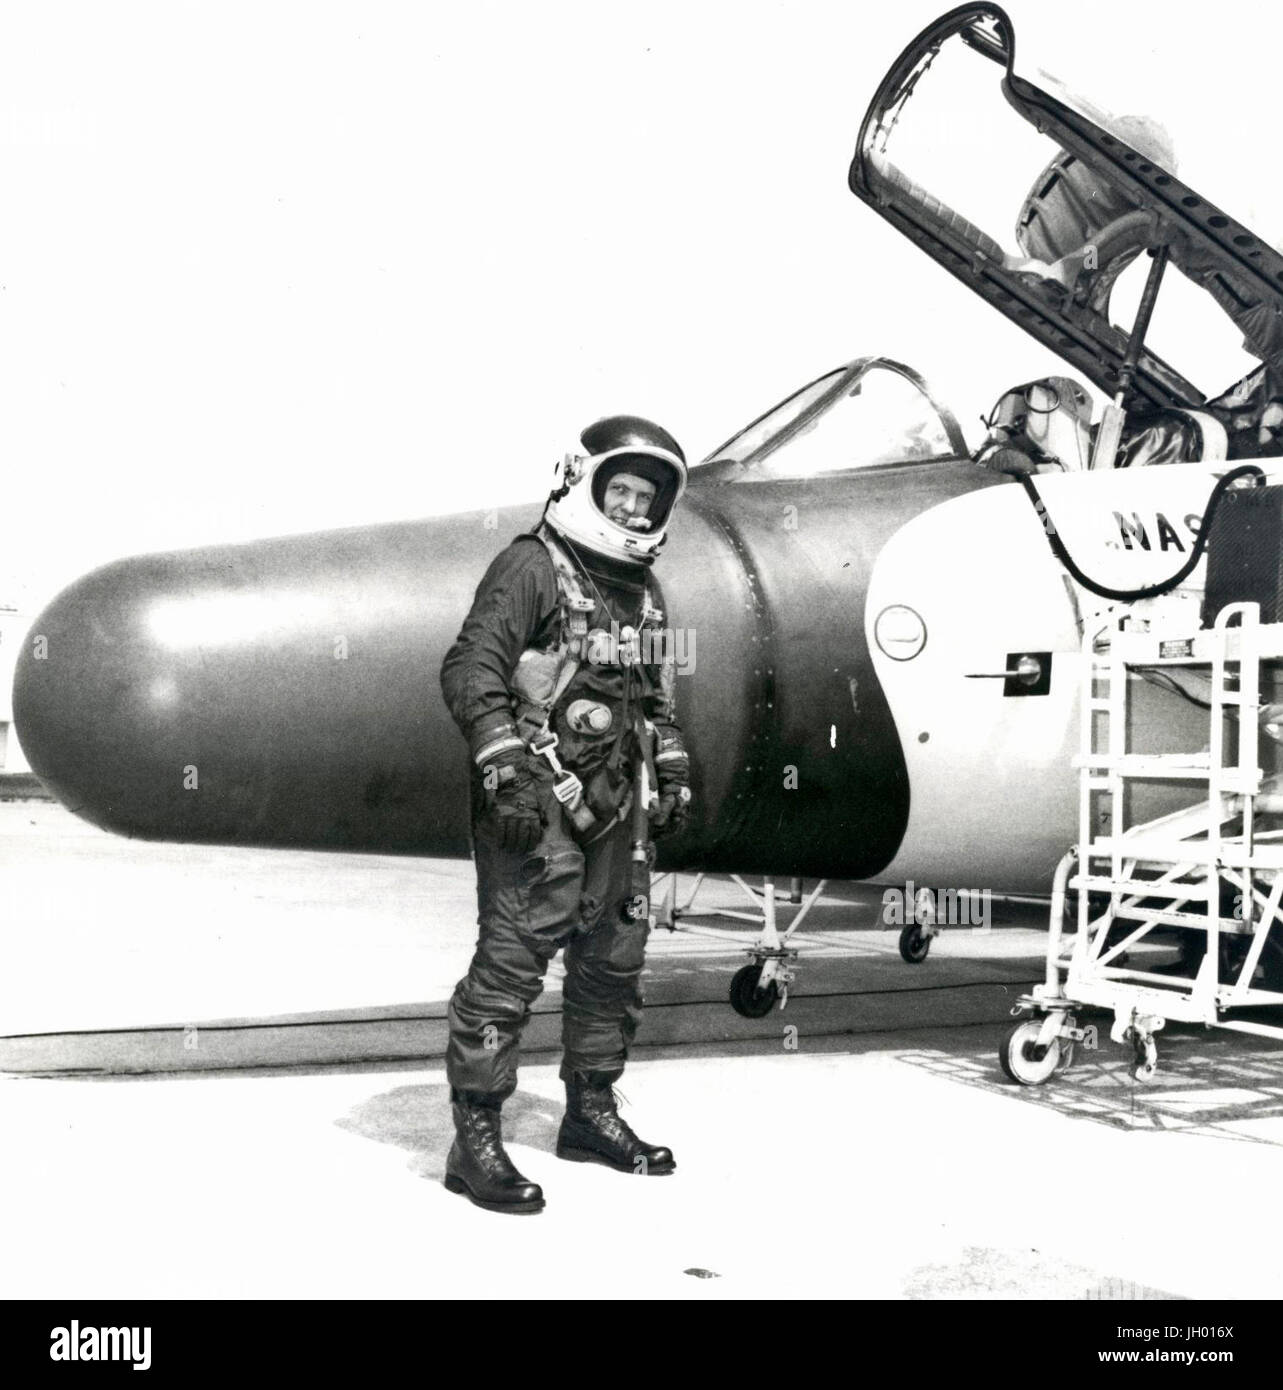 An unofficial sustained American aviation altitude record for women was set July 1, 1979, by astronaut candidate Kathryn D. Sullivan in a NASA WB-57F reconnaissance aircraft. The record altitude of 63,300 feet was reached during a four-hour flight. Sullivan, in a high altitude pressure suit, operated color infrared cameras and multispectral scanning equipment as the WB-57F spent one and one-half hours of the Big Bend area of West Texas. Piloting the aircraft was Jim Korkowski, one of the NASA Airborne Instrumentation Research Program Pilots. The flight was out of Ellington AFB near Houston. Su Stock Photo